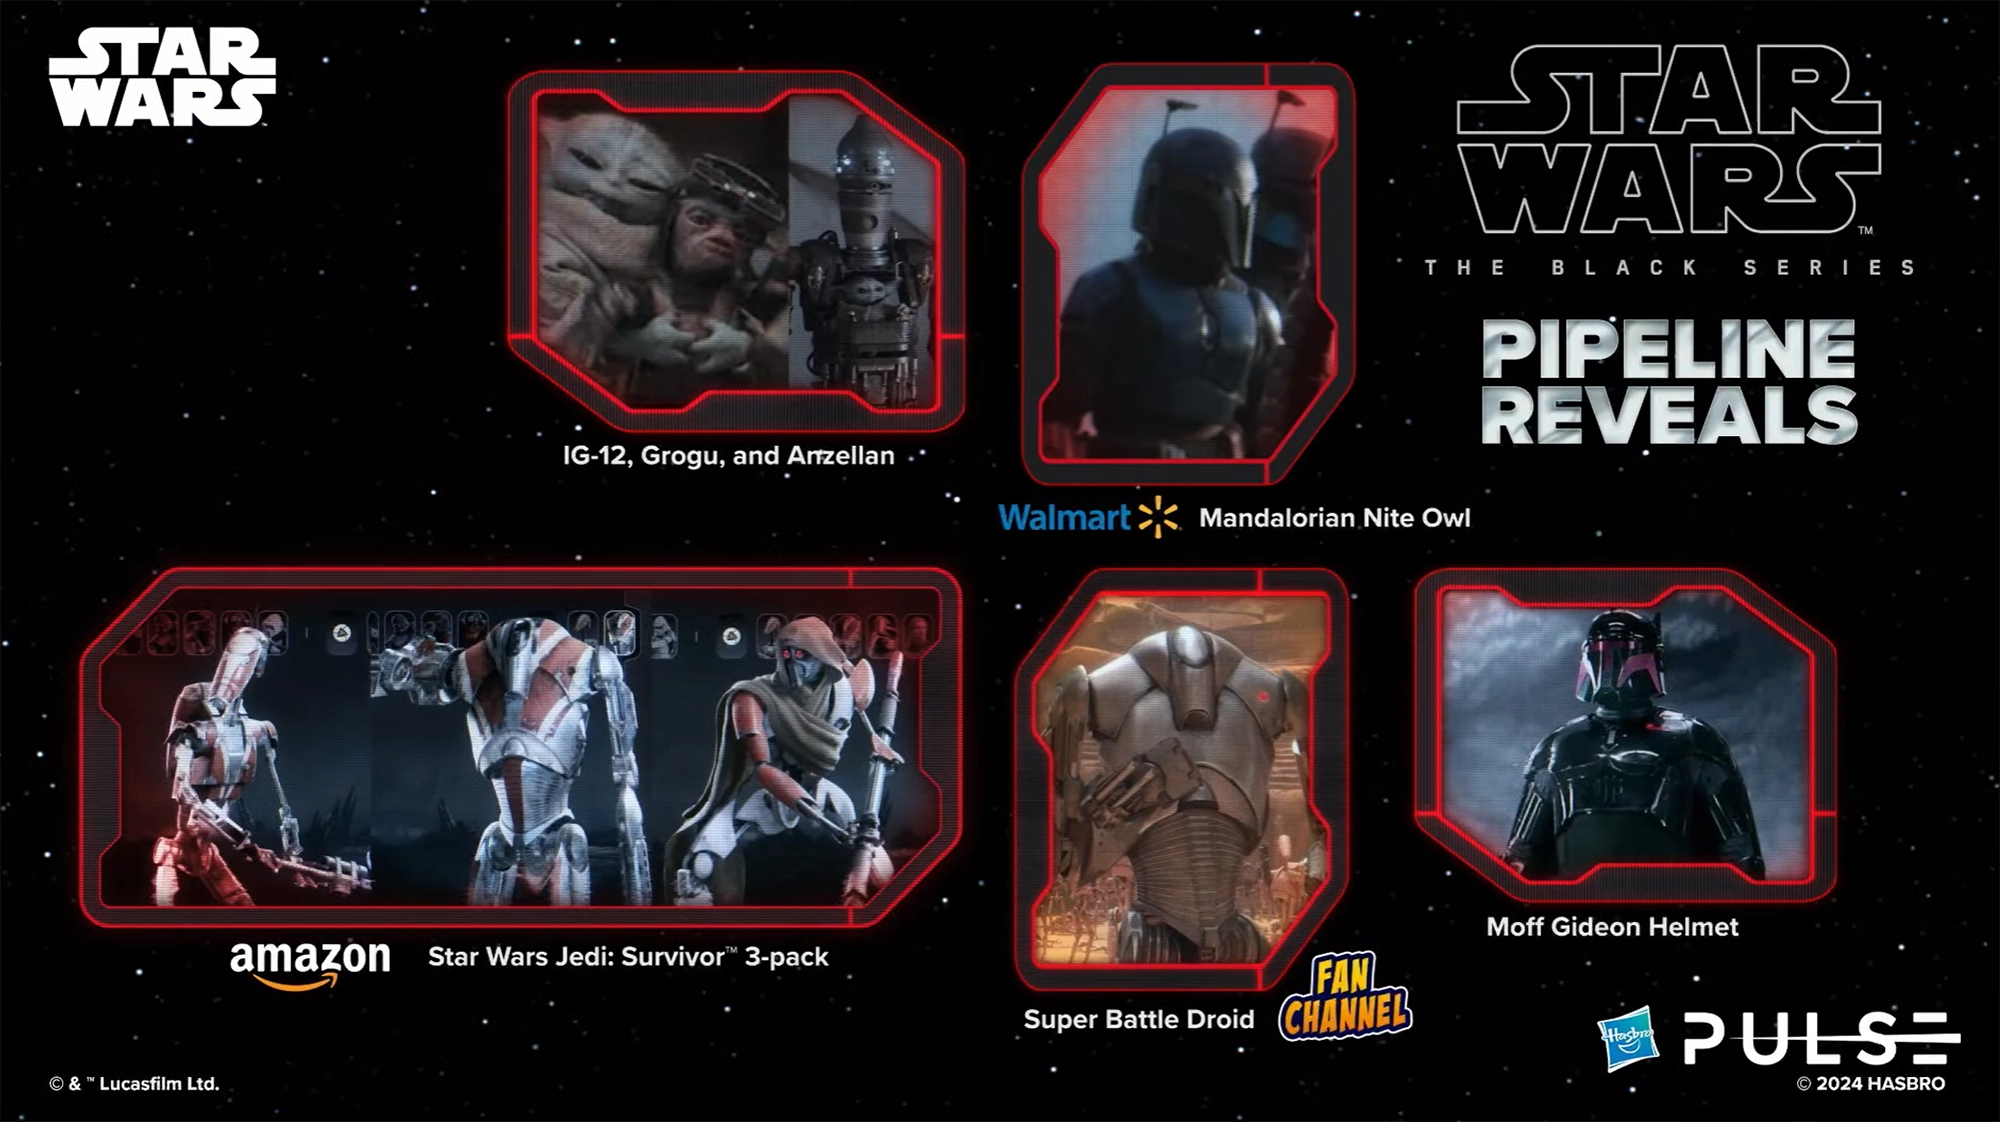 Black Series Pipeline reveals for late 2024 or 2025